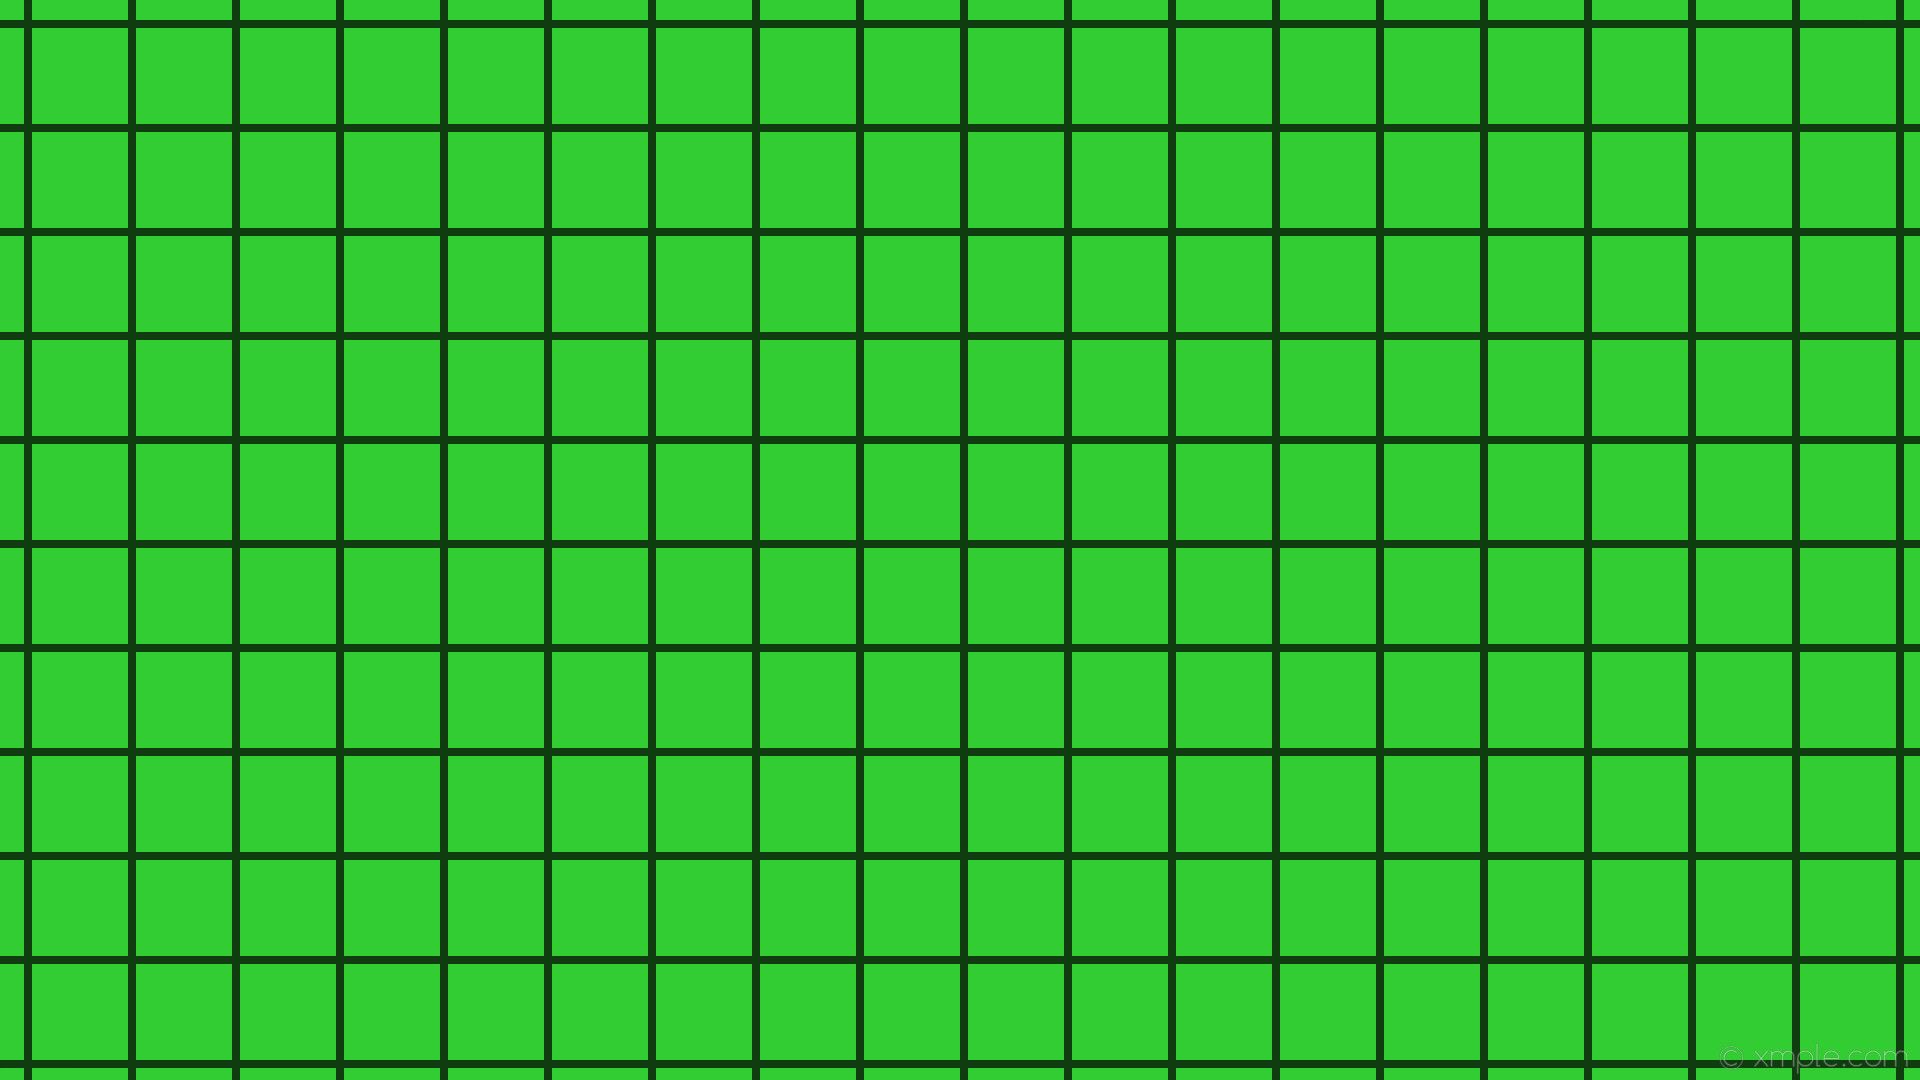 A green grid with black squares - Lime green, grid